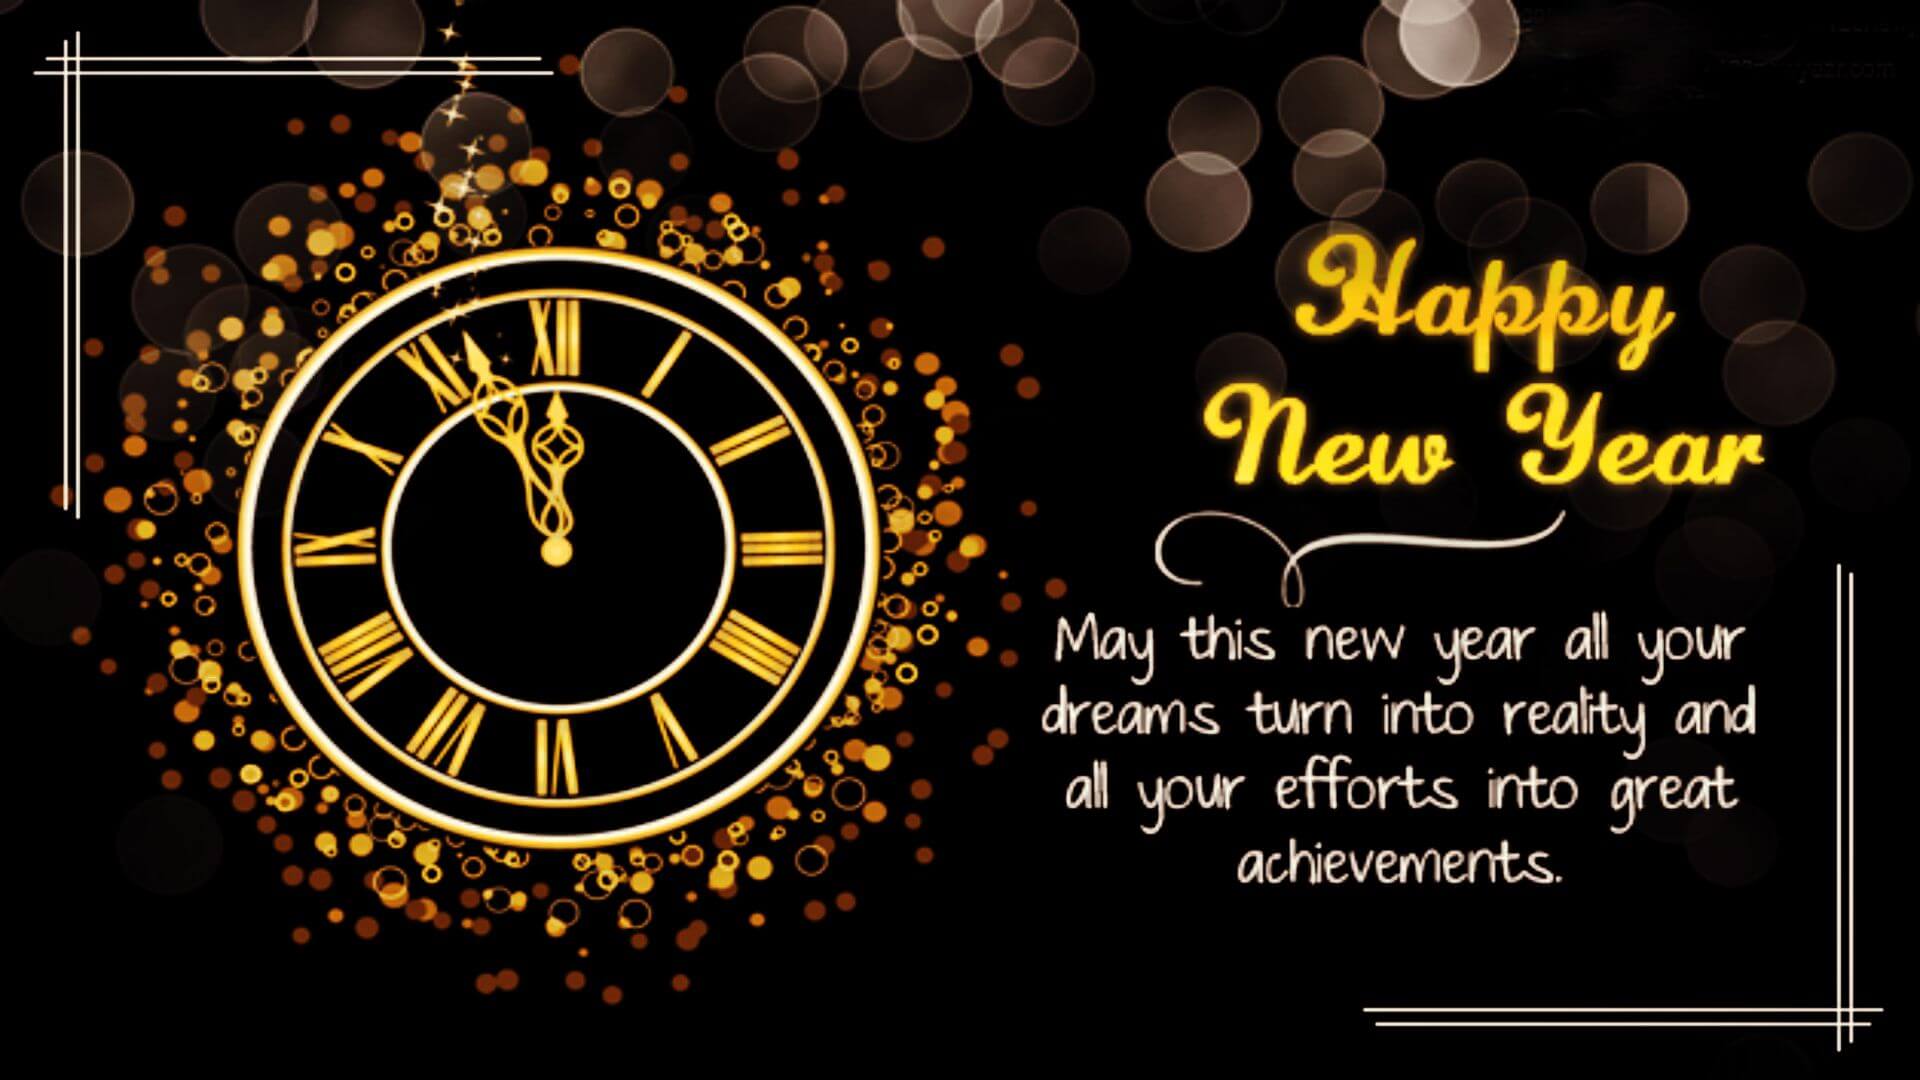 happy new year quotes 2023; happy new year wishes; happy new year images; happy new year 2023; happy new year status; happy new year quotes; best happy new year wishes; top new year wishes; new year wishes for love; happy new year quotes for friends 2023; 